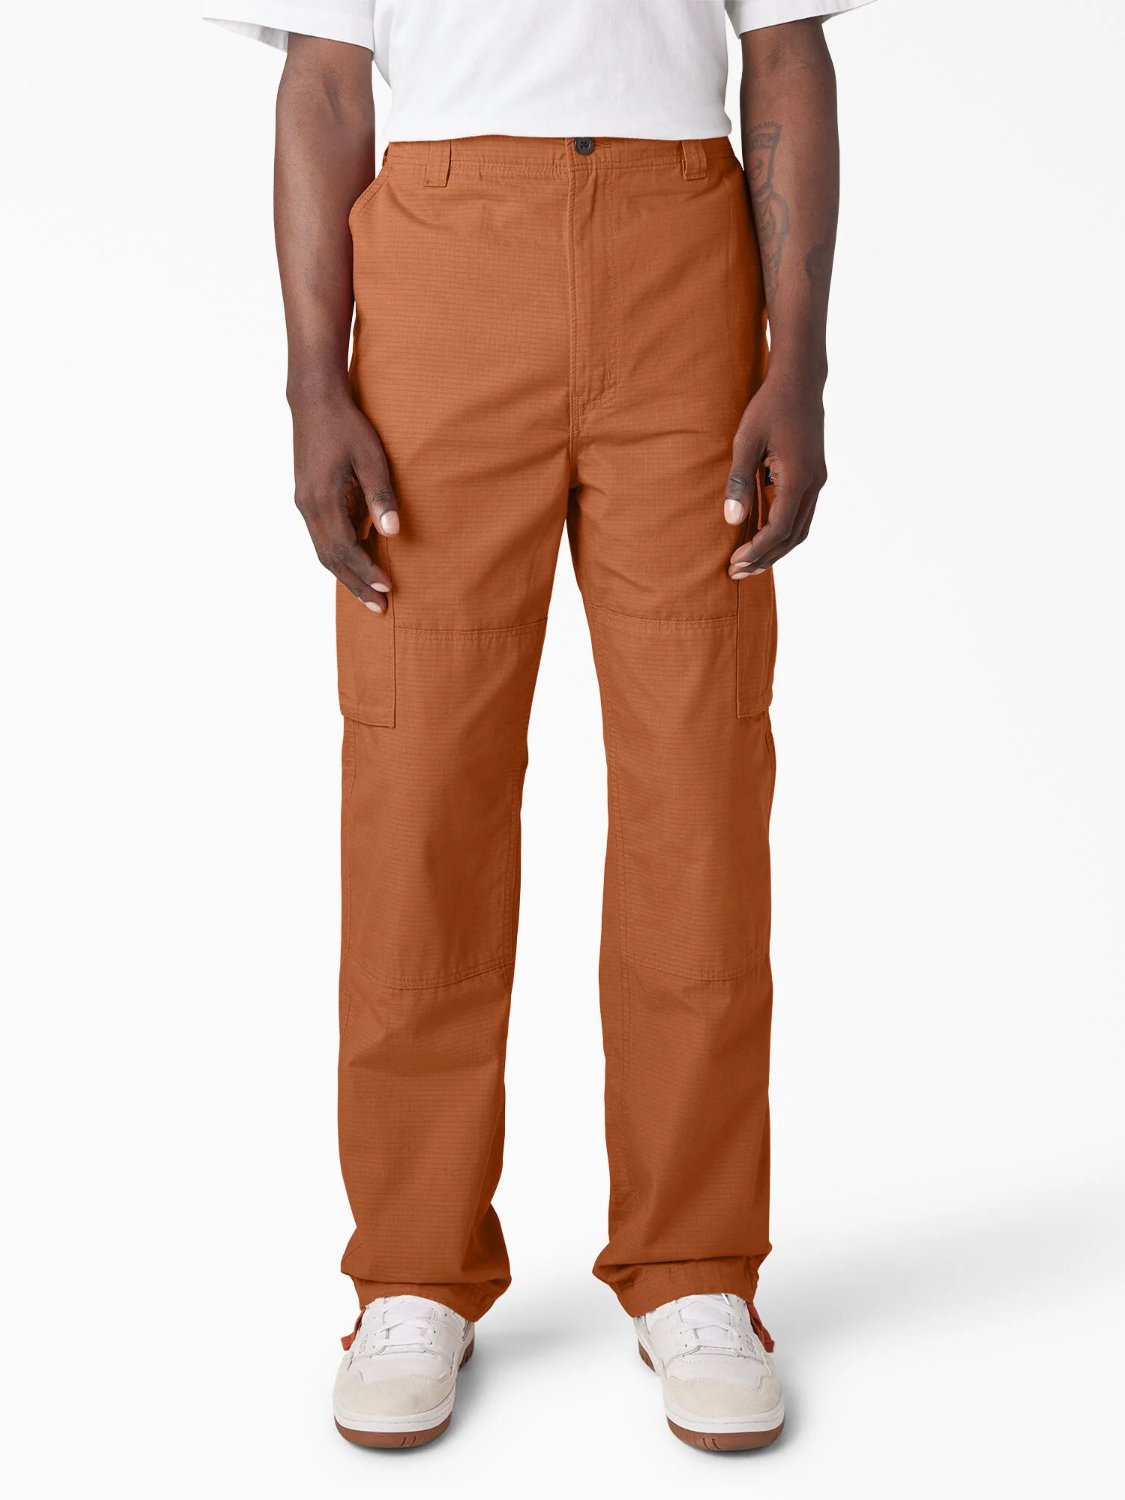 DICKIES EAGLE BEND RELAXED FIT DOUBLE KNEE CARGO PANT BOMBAY BROWN 